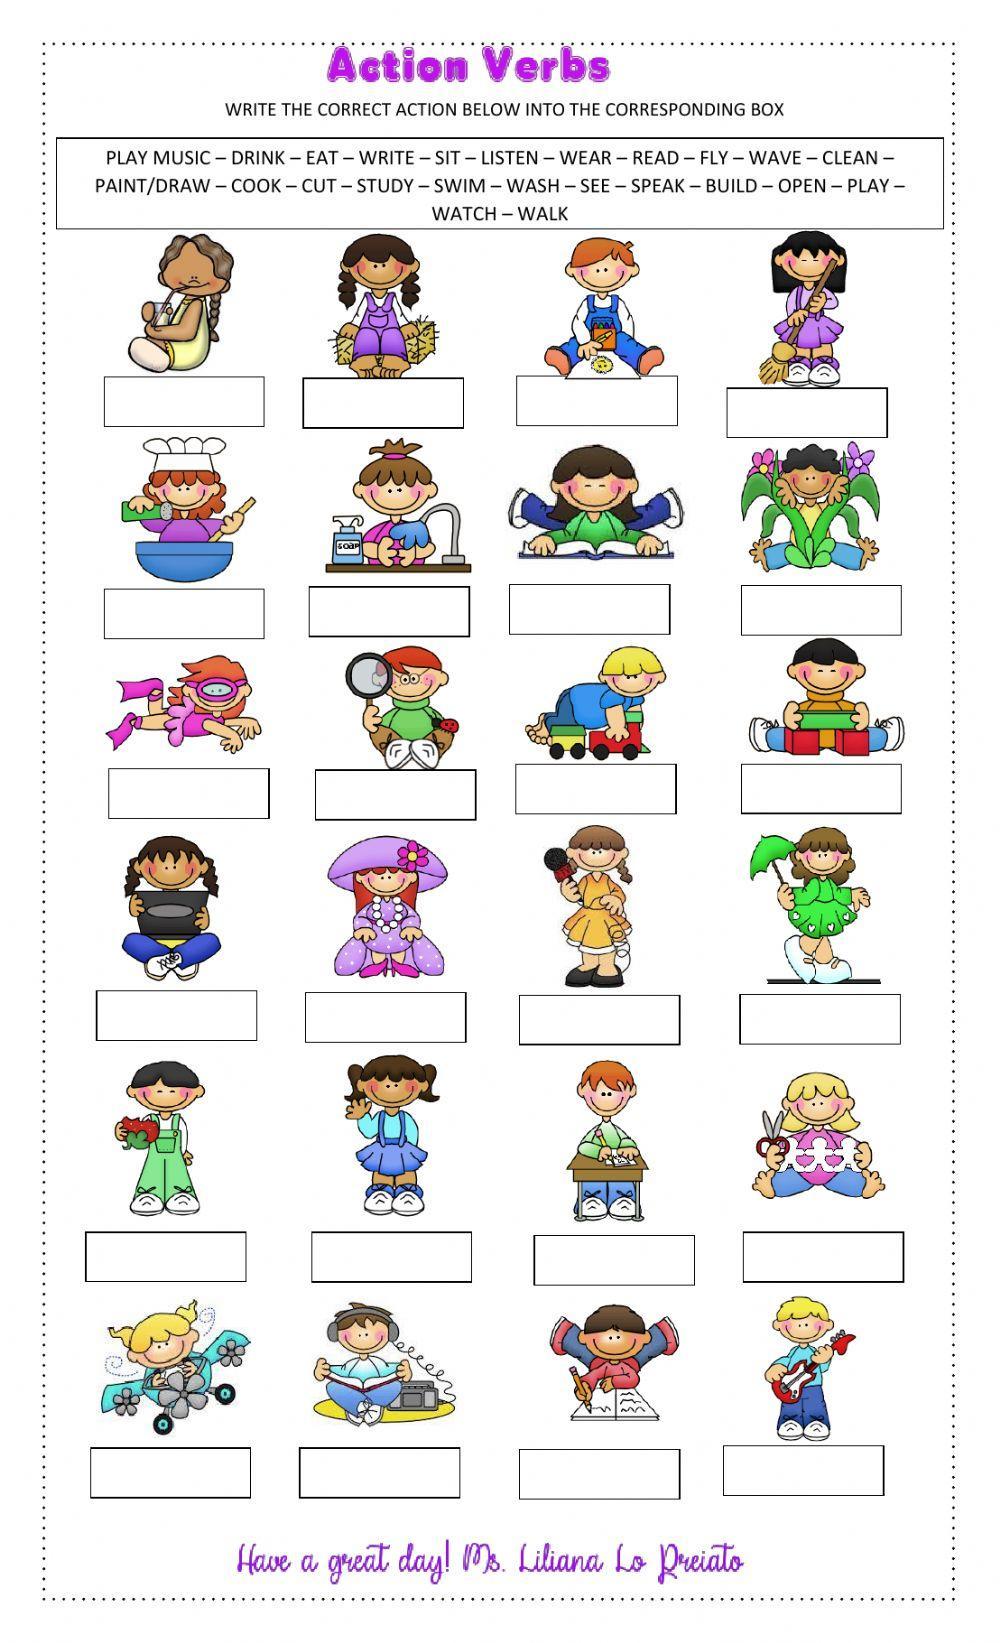  Action Verbs Activity Live Worksheets